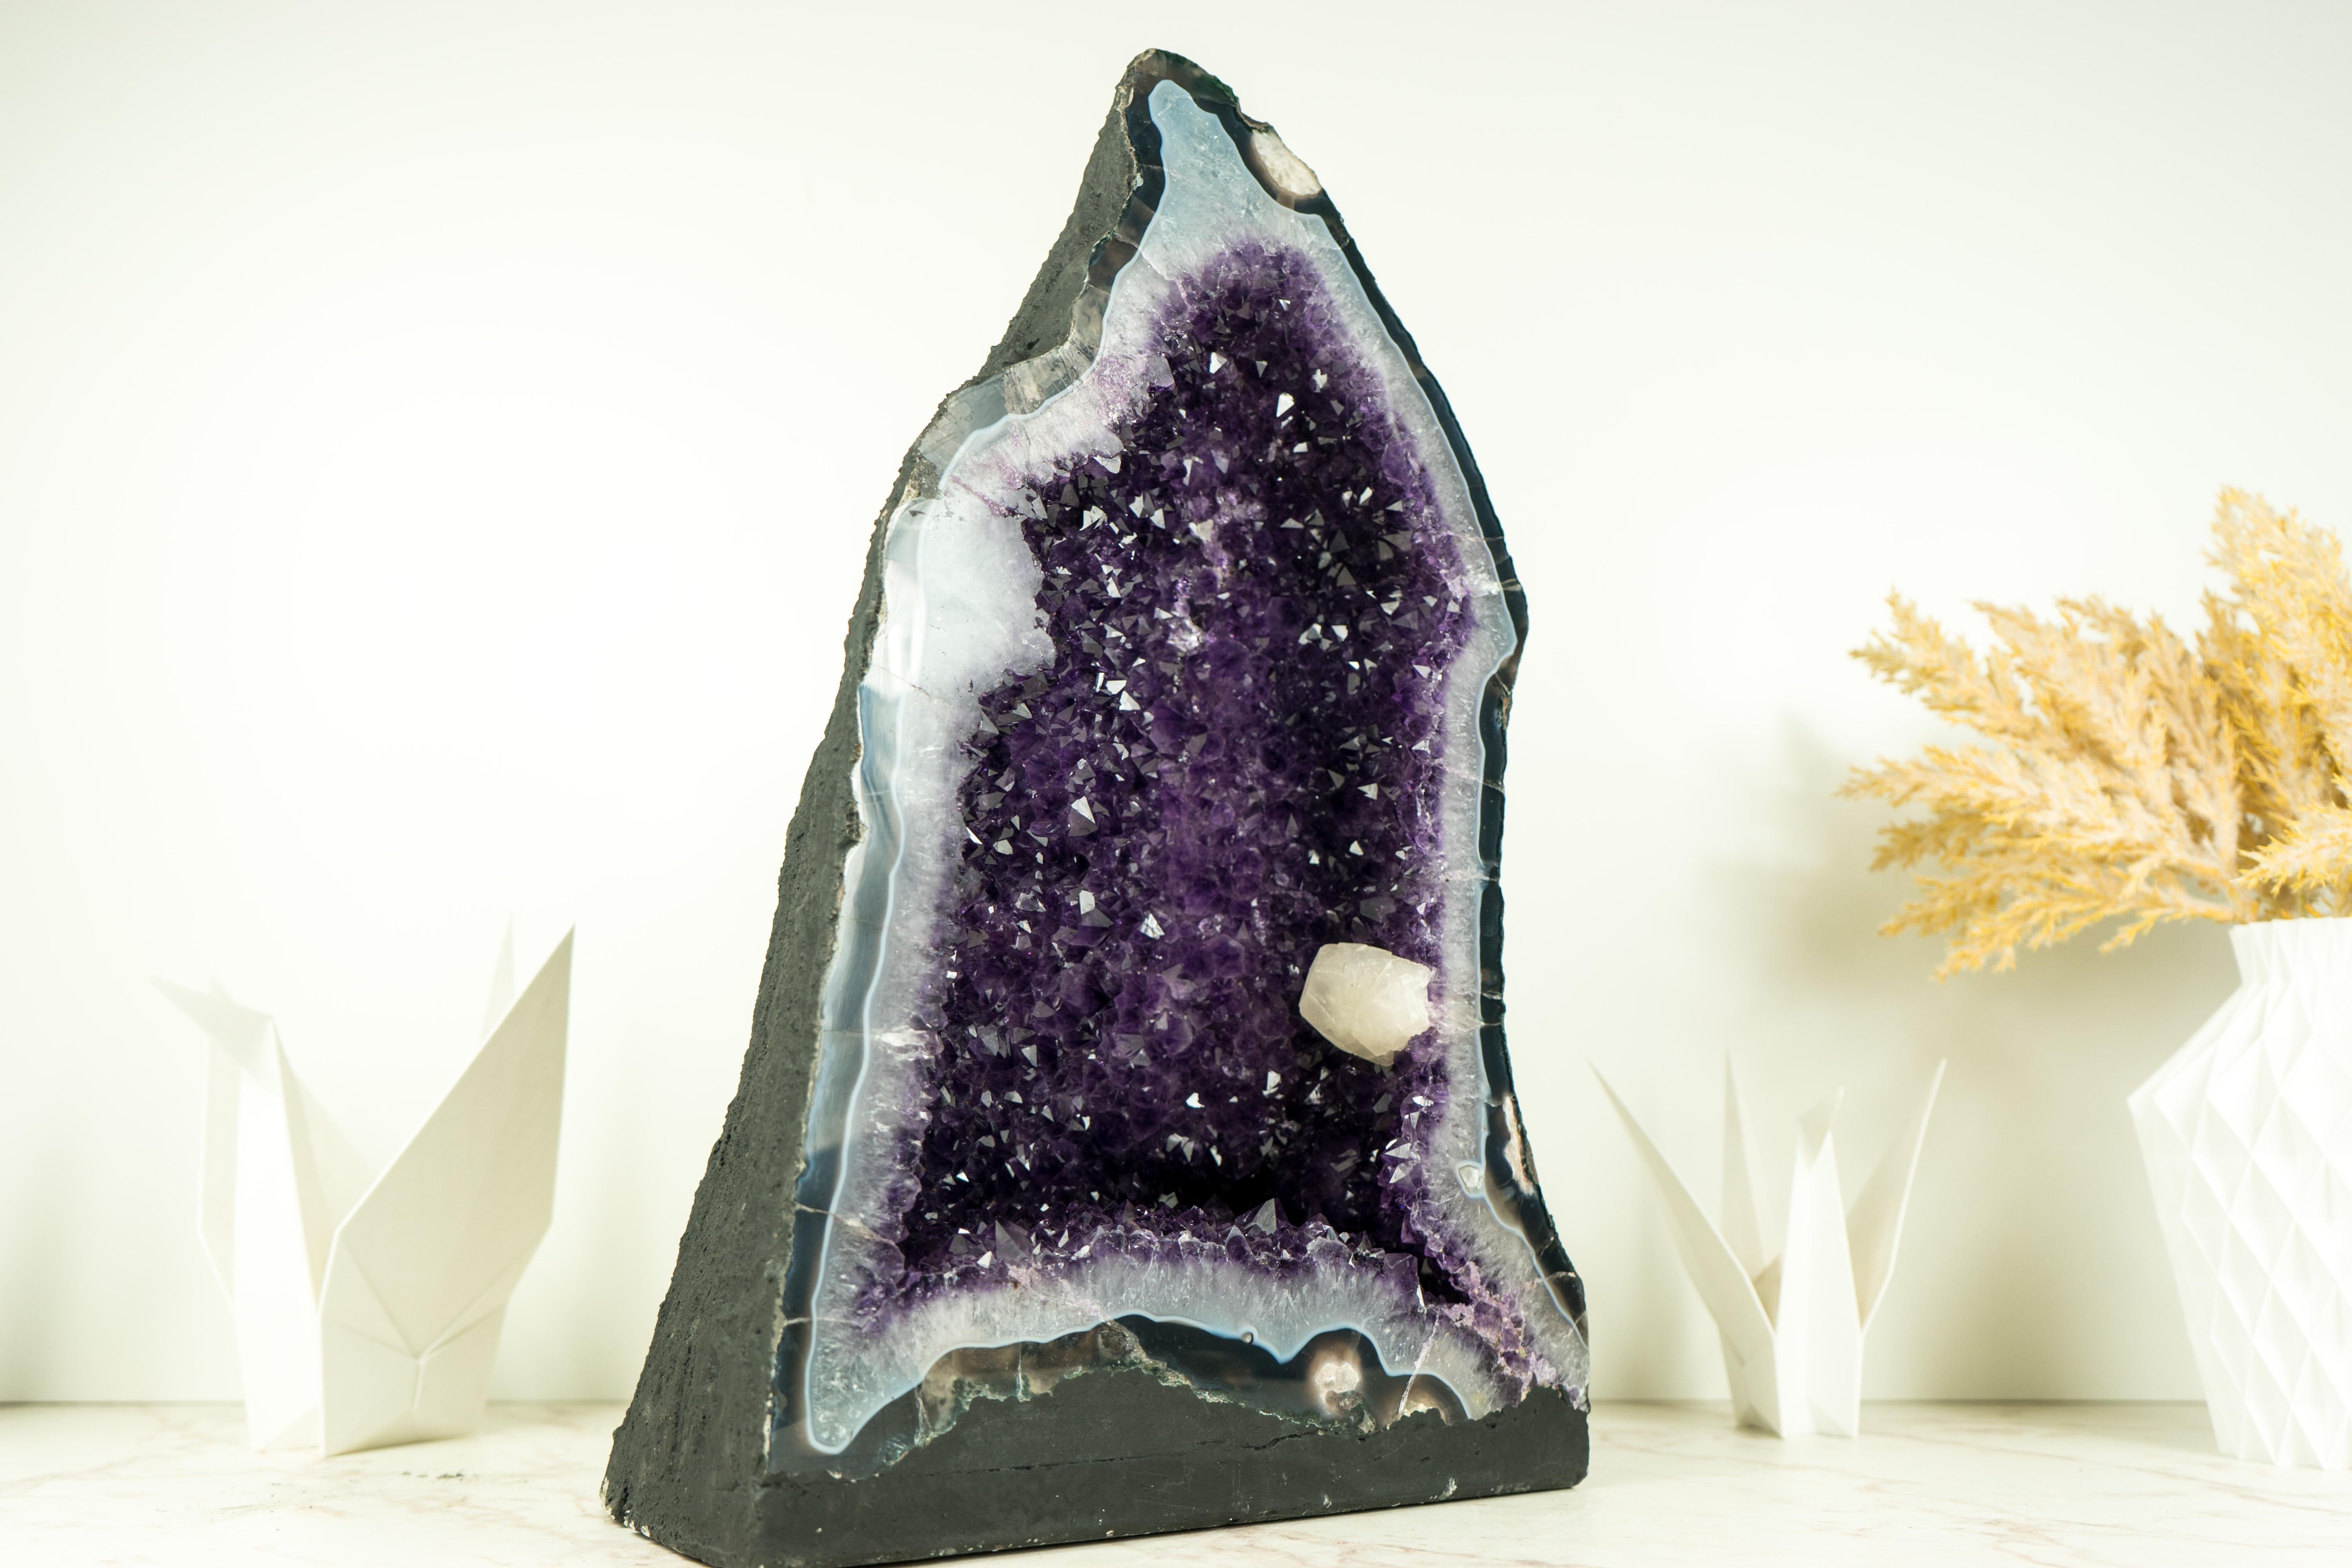 A geode that stands as an impressive natural sculpture, with calcite, deep purple, and shiny amethyst, and an aesthetical calcite inclusion interlacing that forms a unique display of natural artistry, a centerpiece.

Rarely seen in any Amethyst